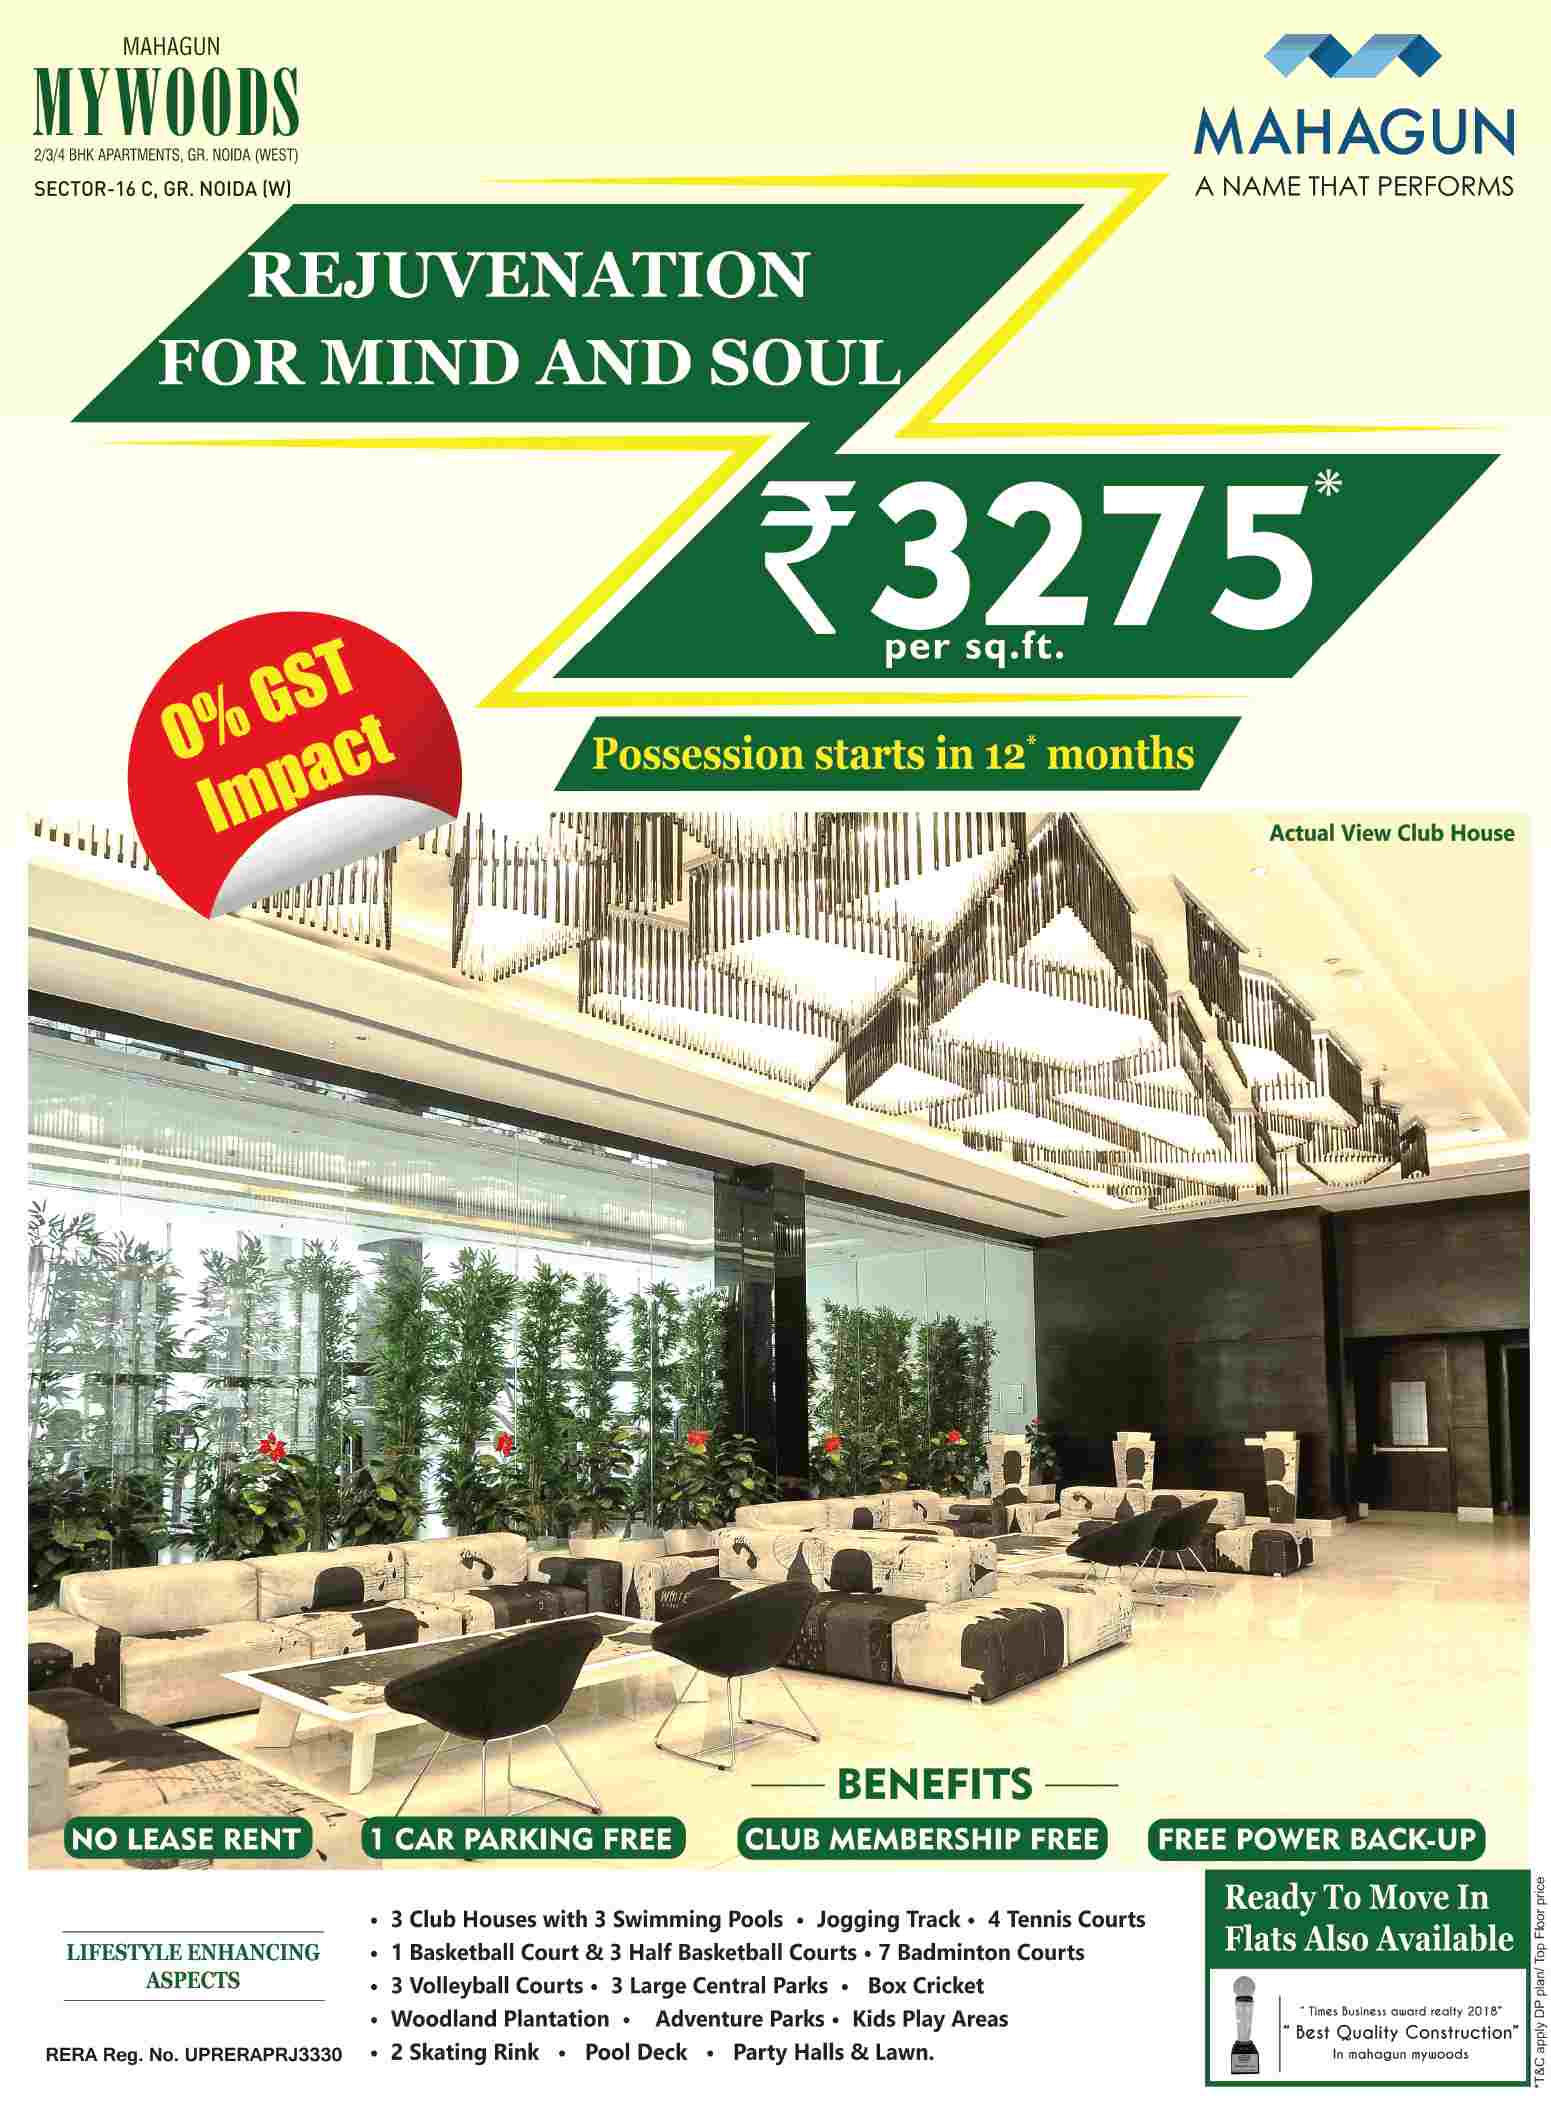 Rejuvenation for mind and soul @ Rs. 3275 per sqft. at Mahagun Mywoods in Greater Noida